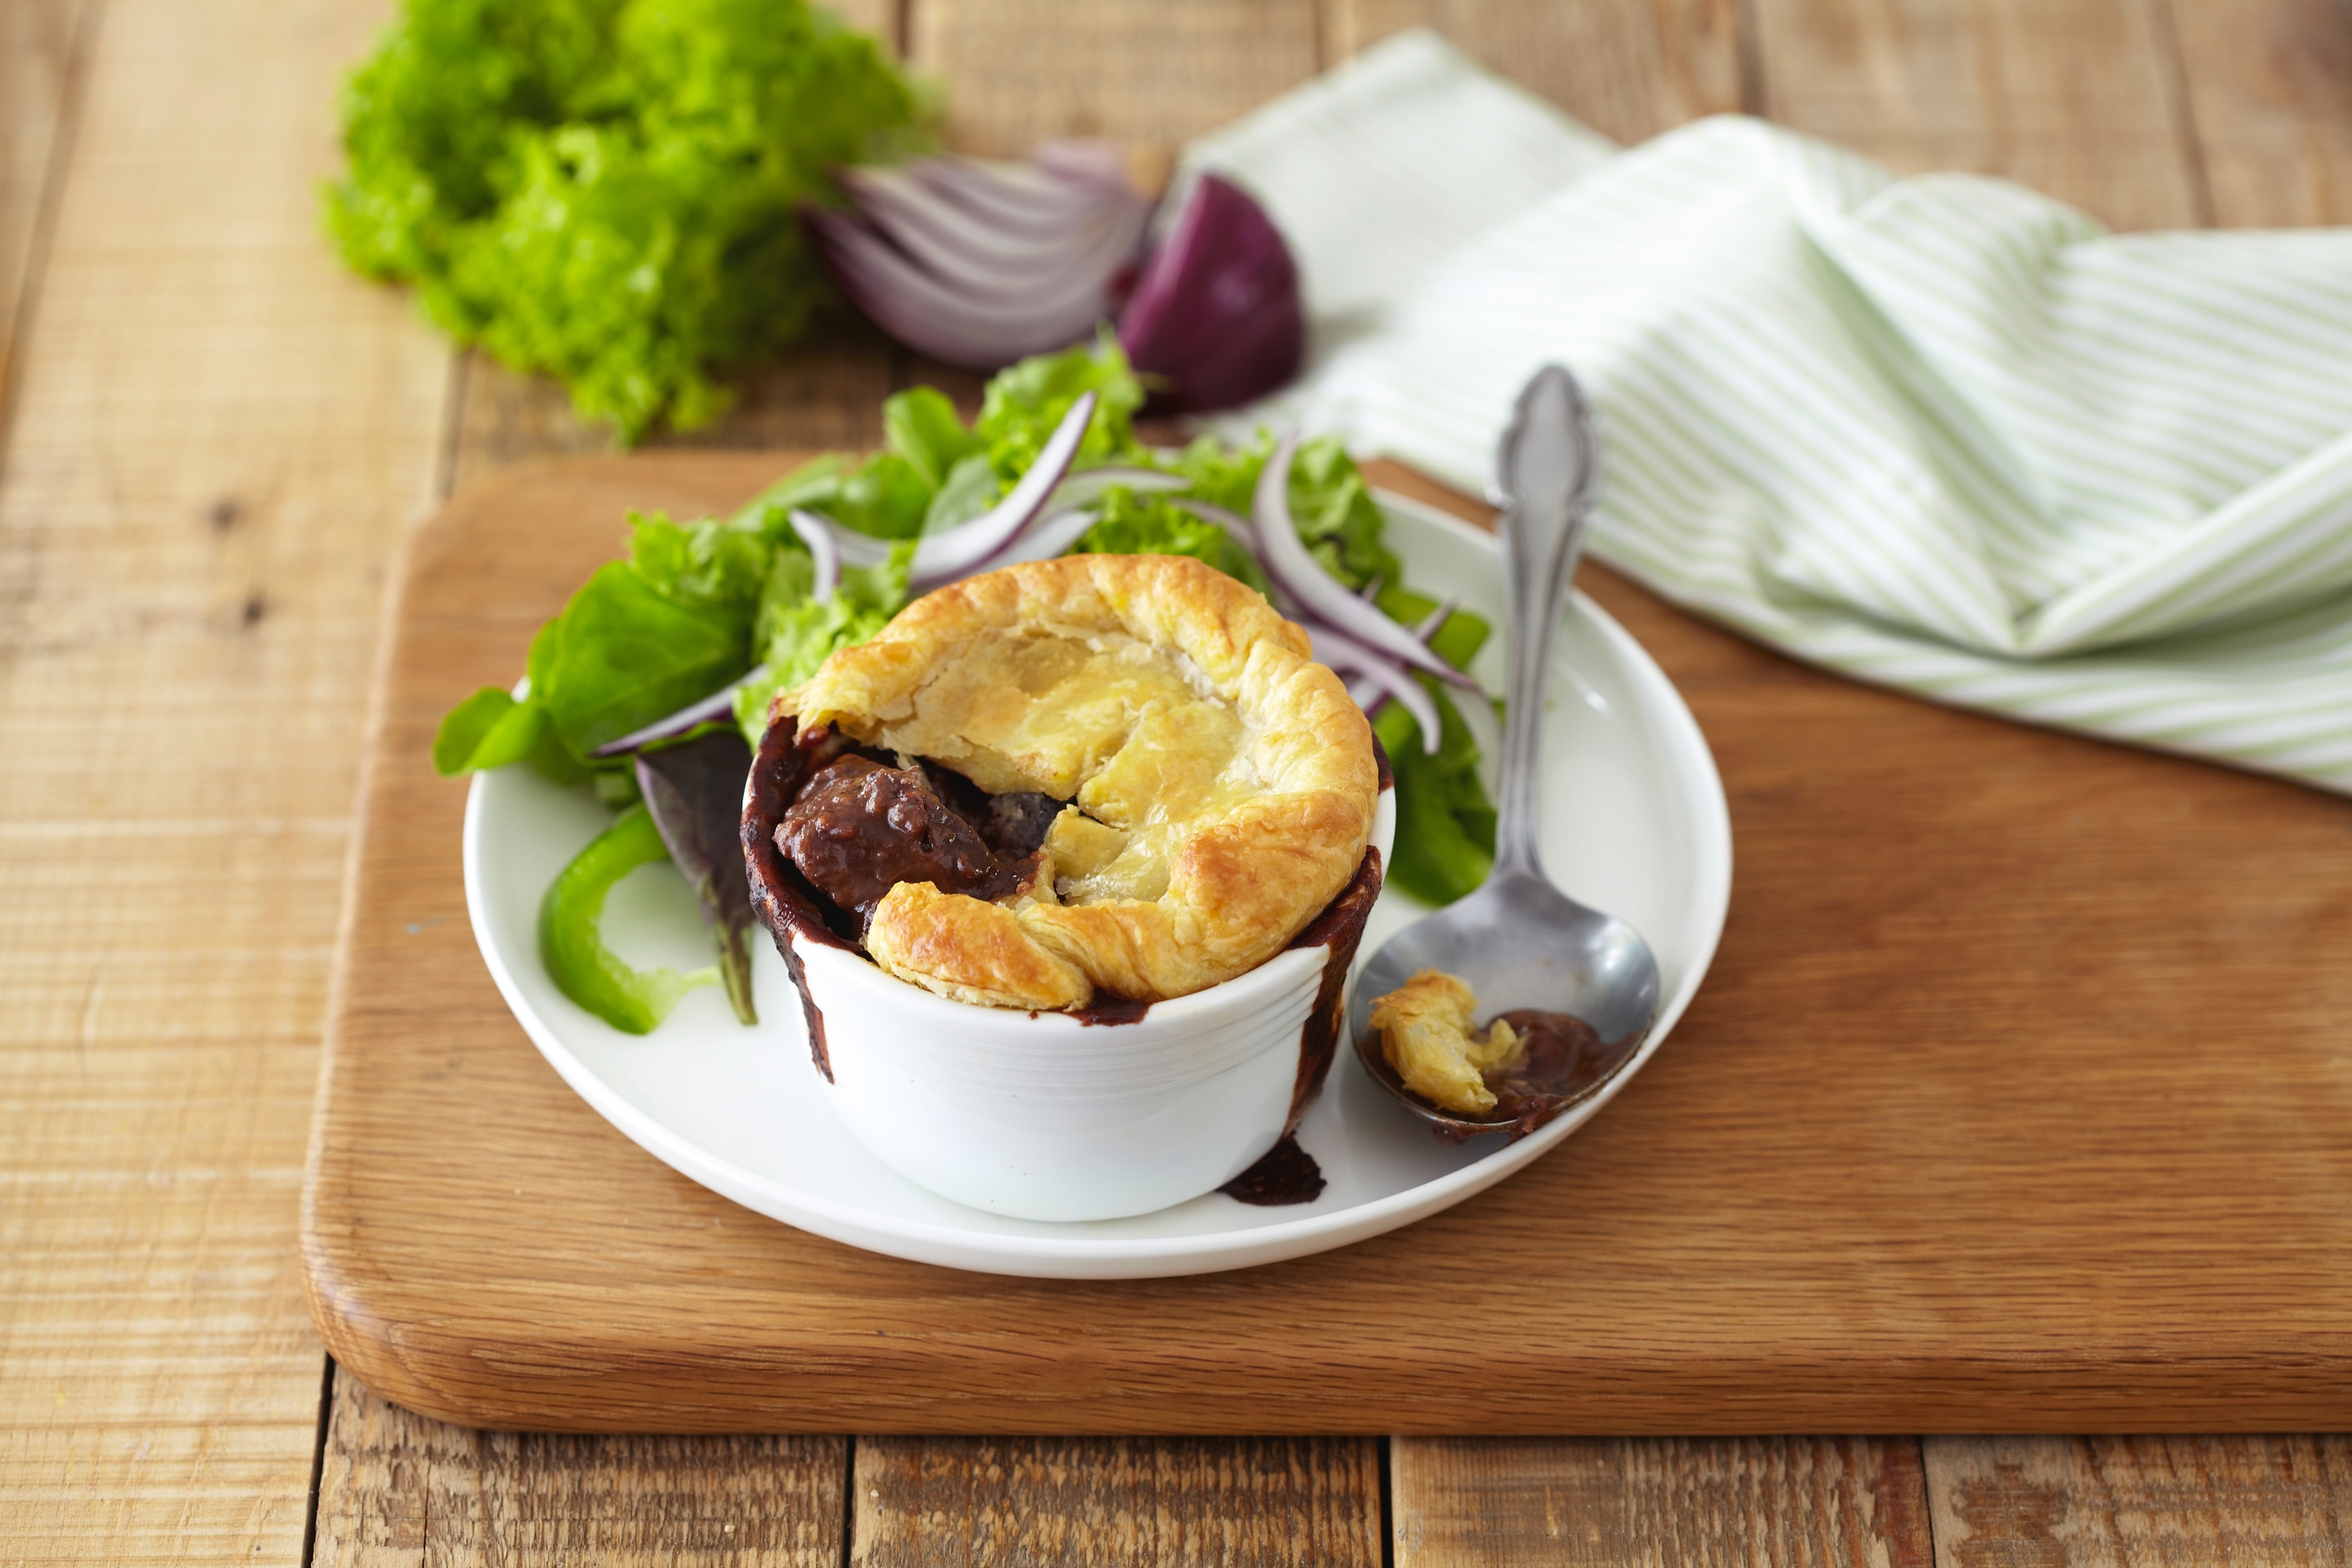 Homemade steak and kidney pie with great pastry